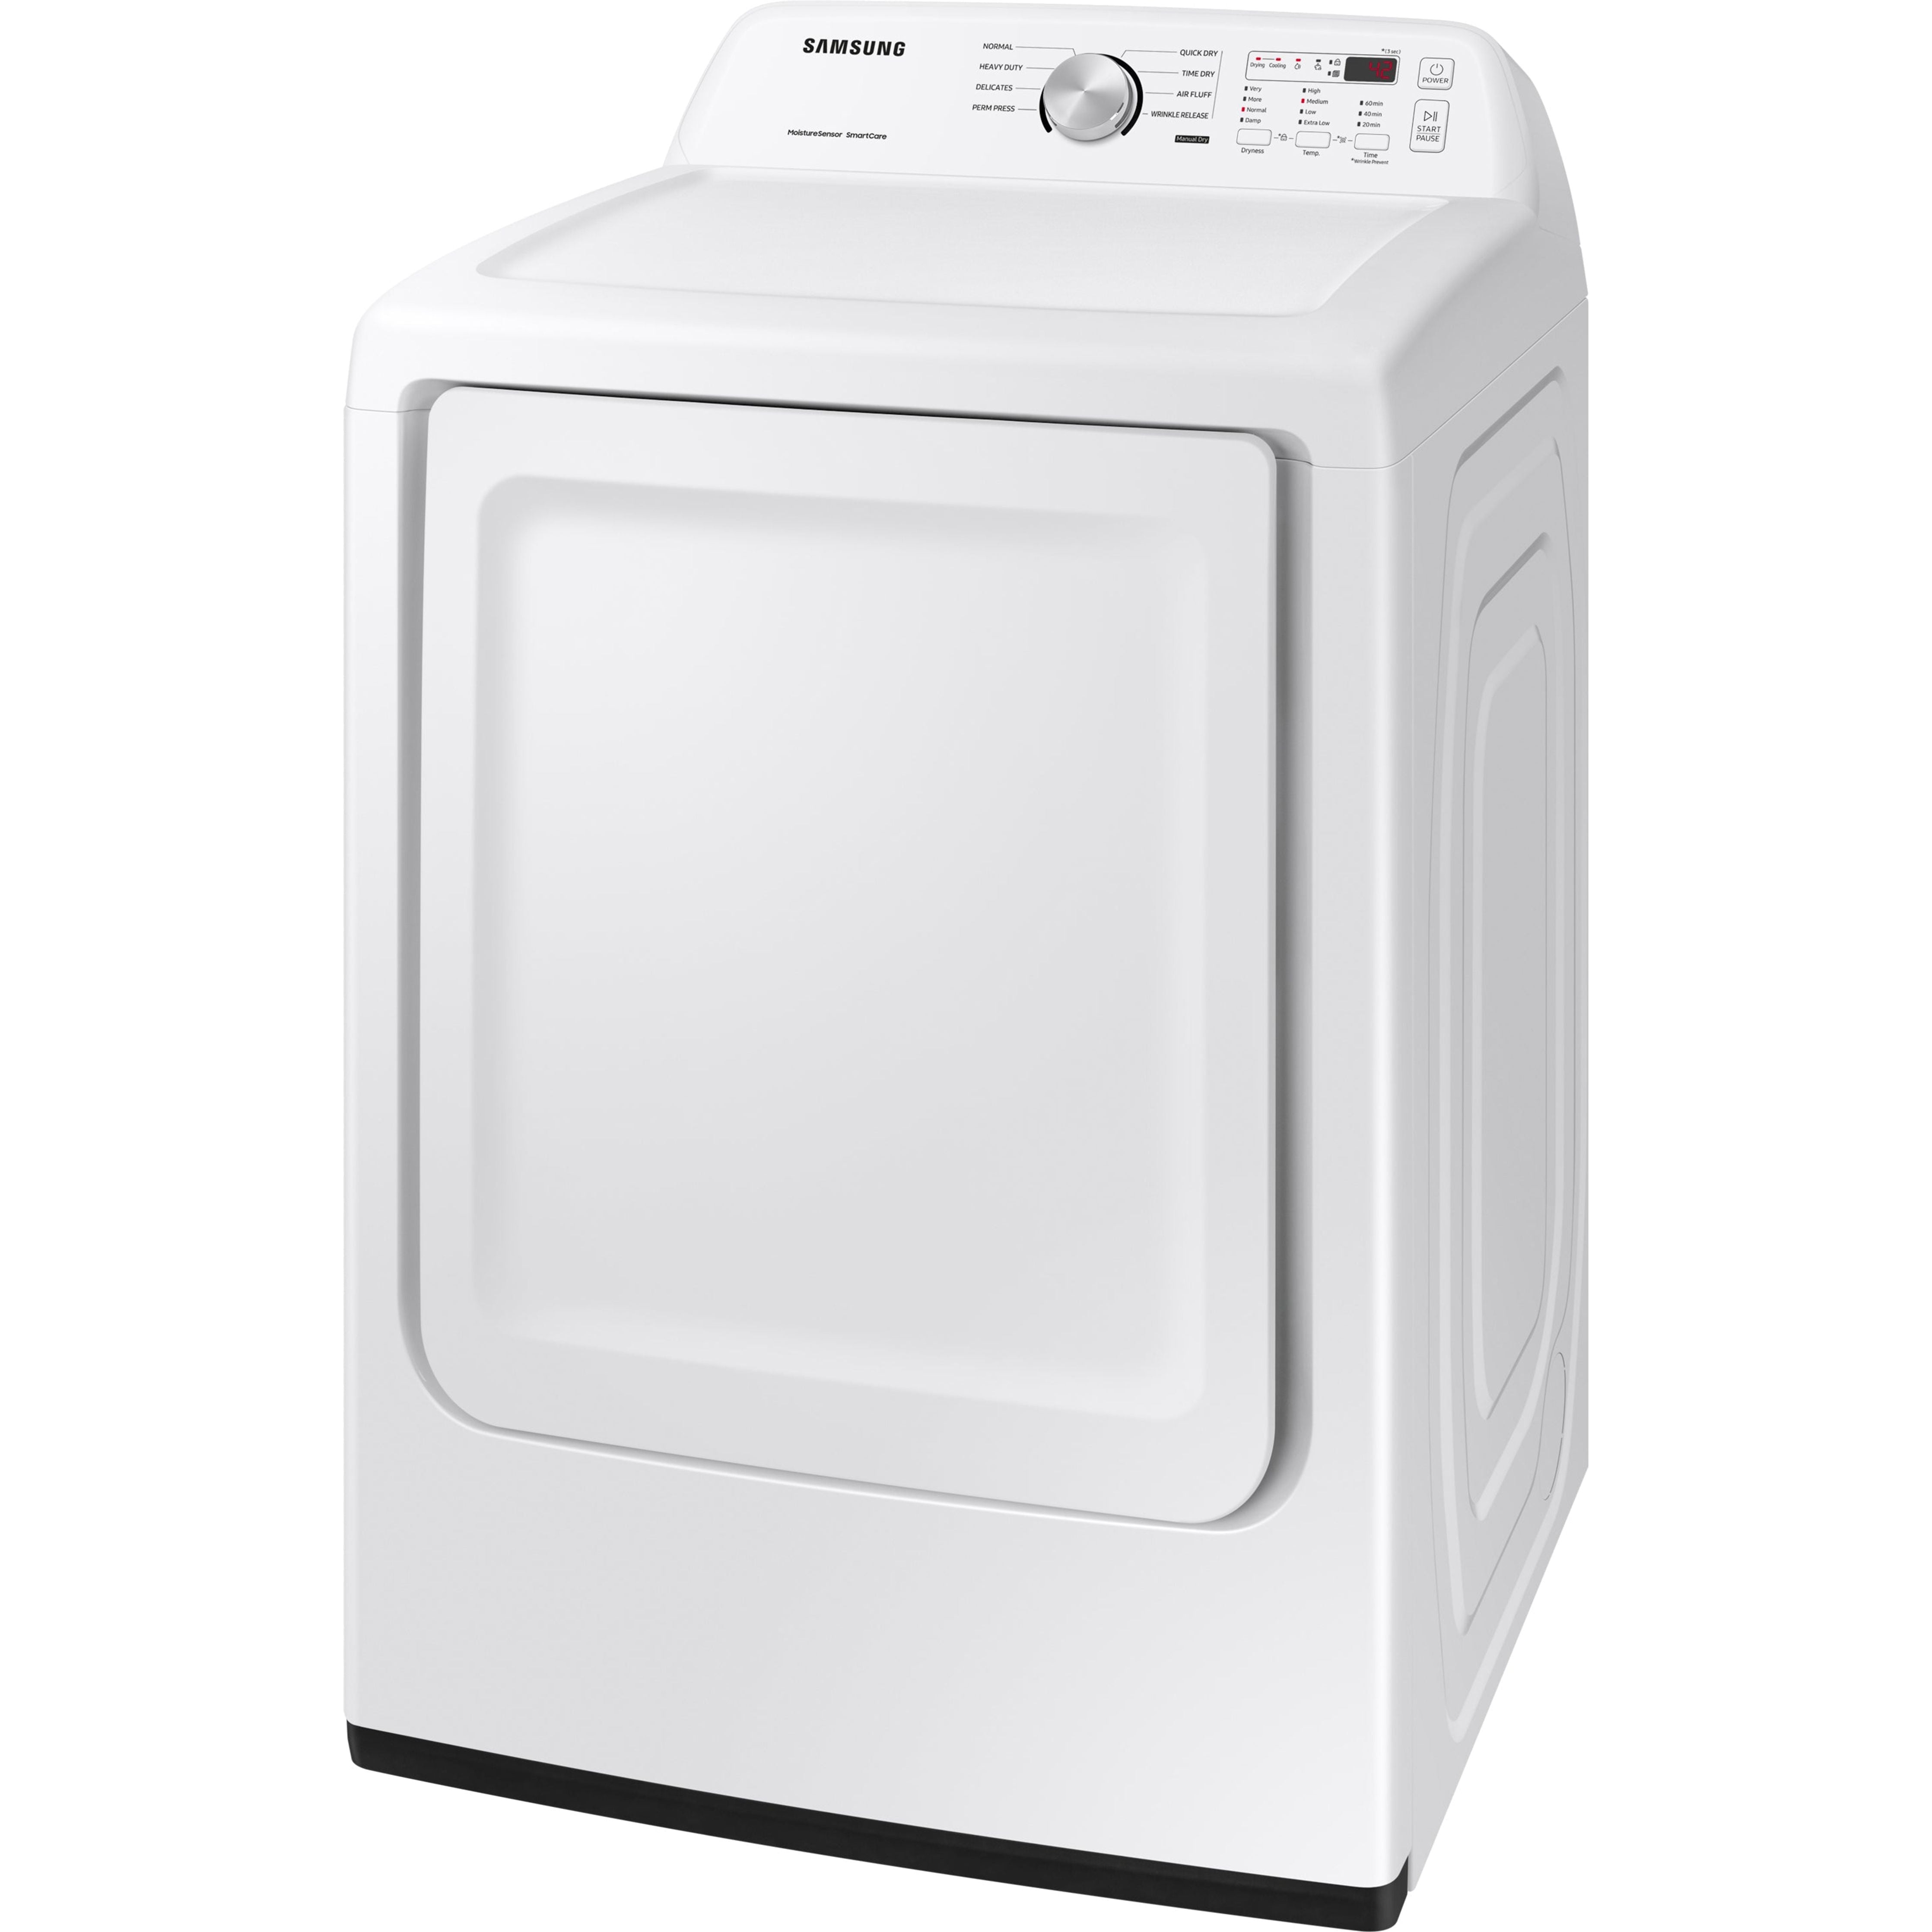 Samsung 7.2 cu.ft. Electric Dryer with Sensor Dry